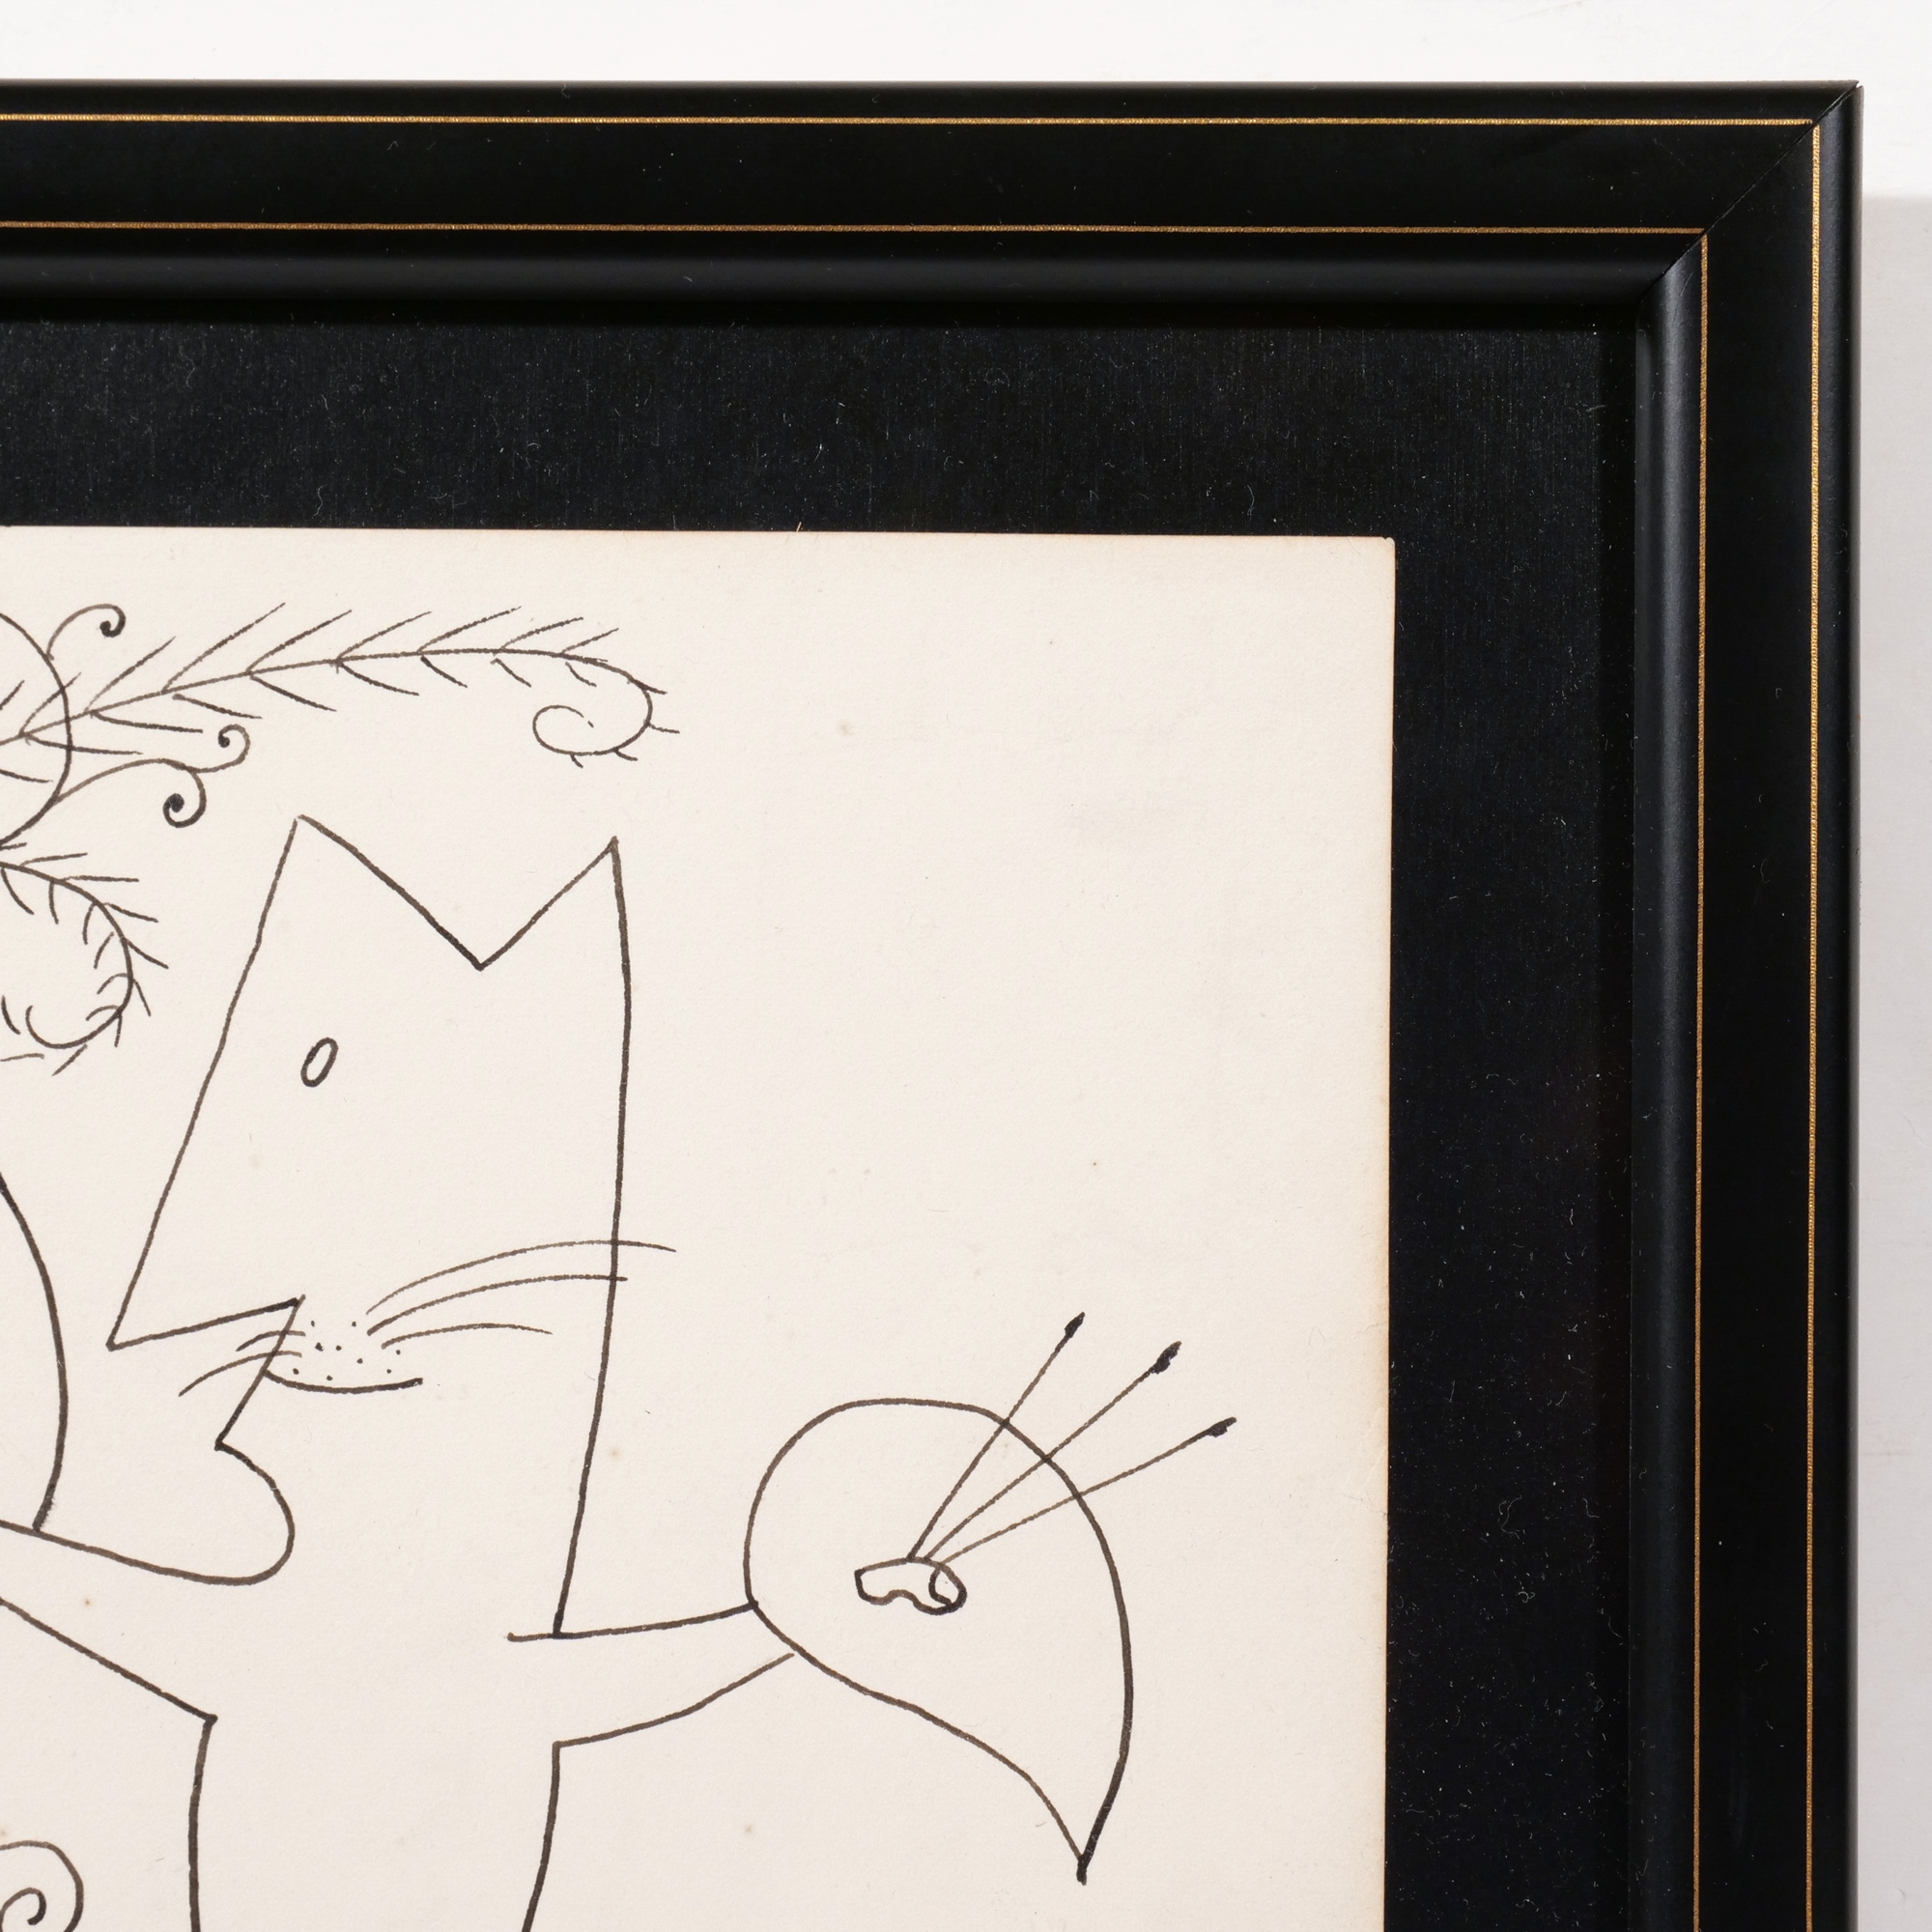 Artwork by Saul Steinberg, Cat painting a man, Made of Pen and ink on paper